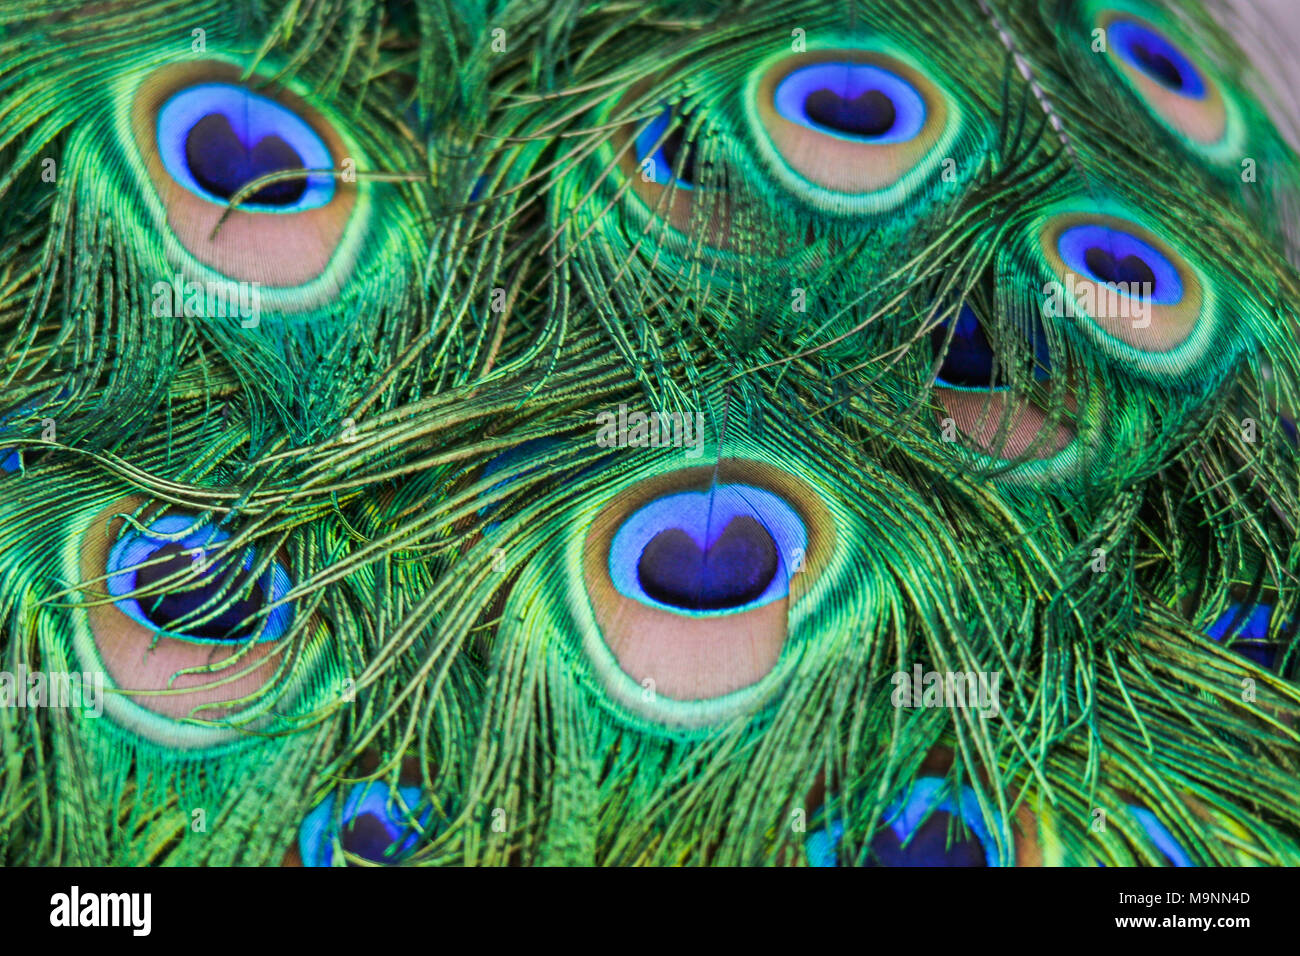 feather dress of Indian or Blue Peacock (Pavo cristatus) with with typical iridescent colorful eye patches Stock Photo